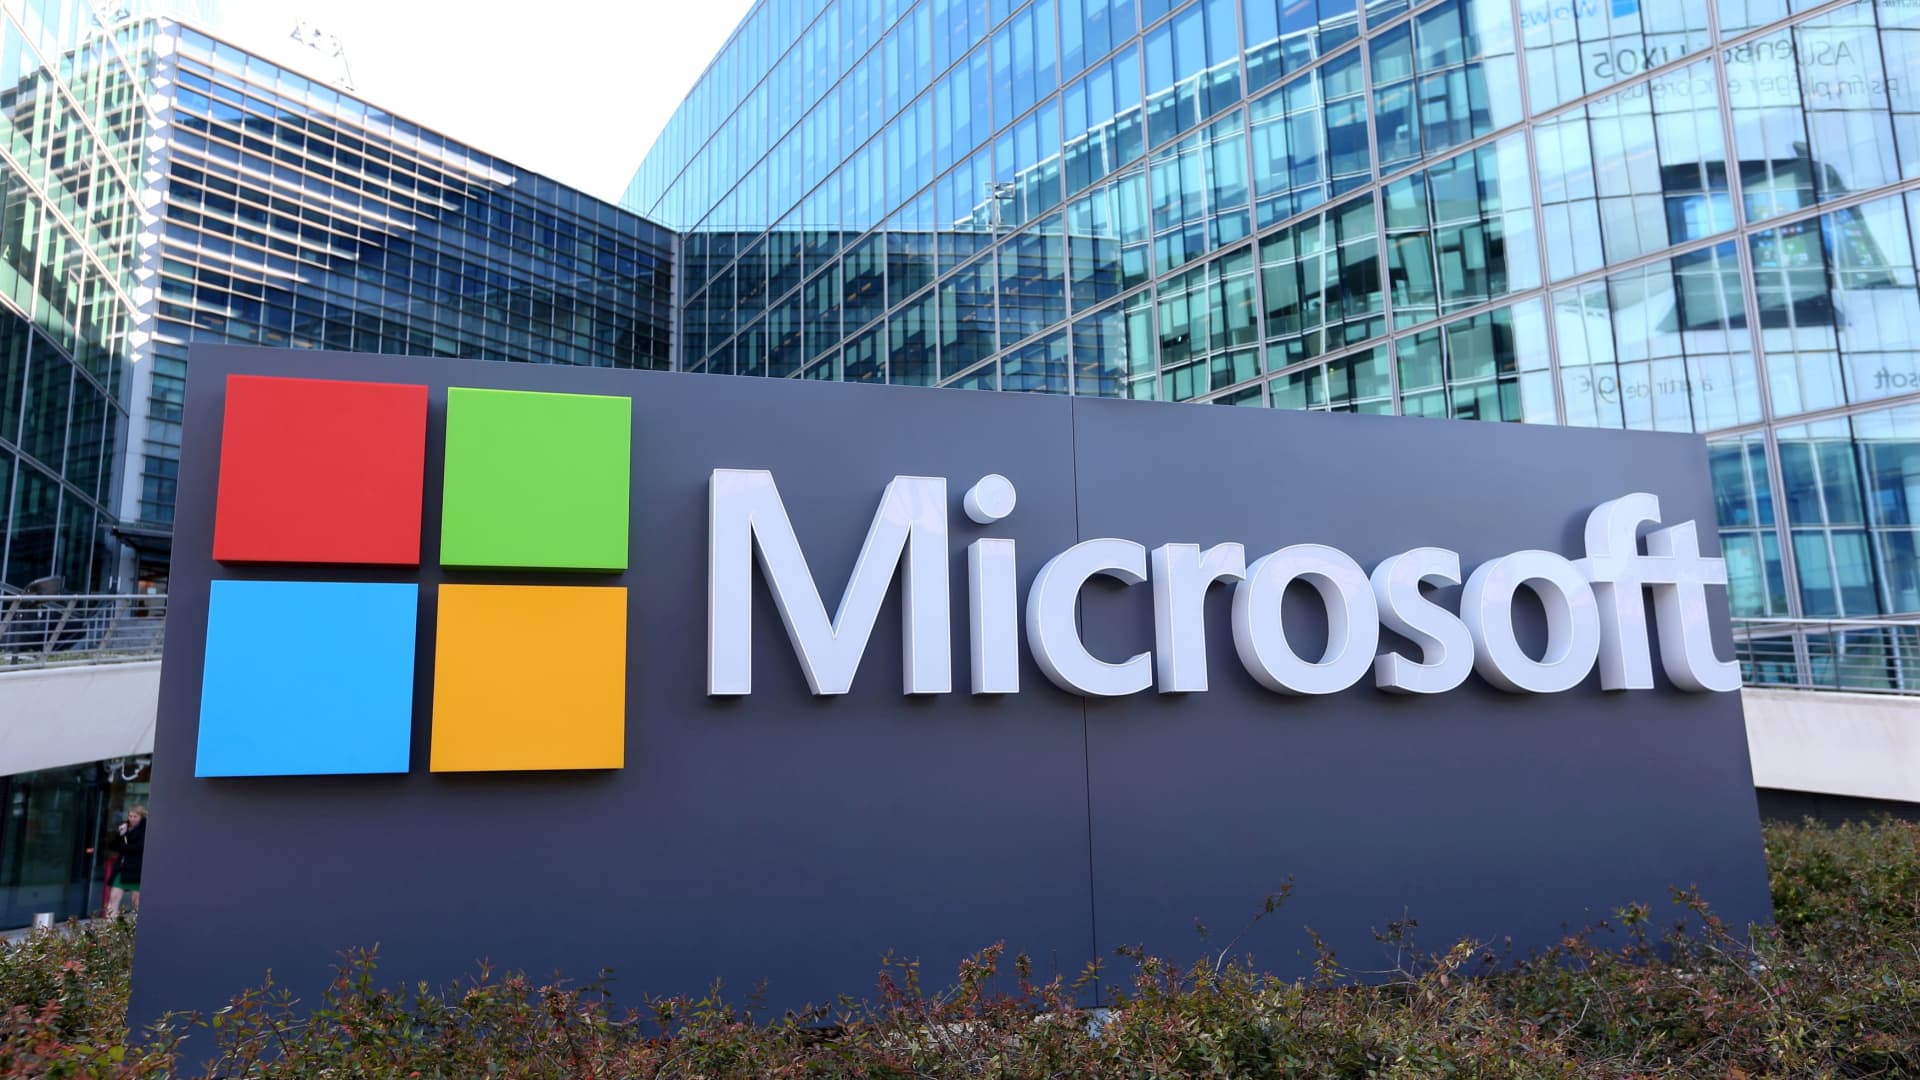 Stocks making the biggest moves midday: Microsoft, Visa, Enphase Energy, Boeing and more